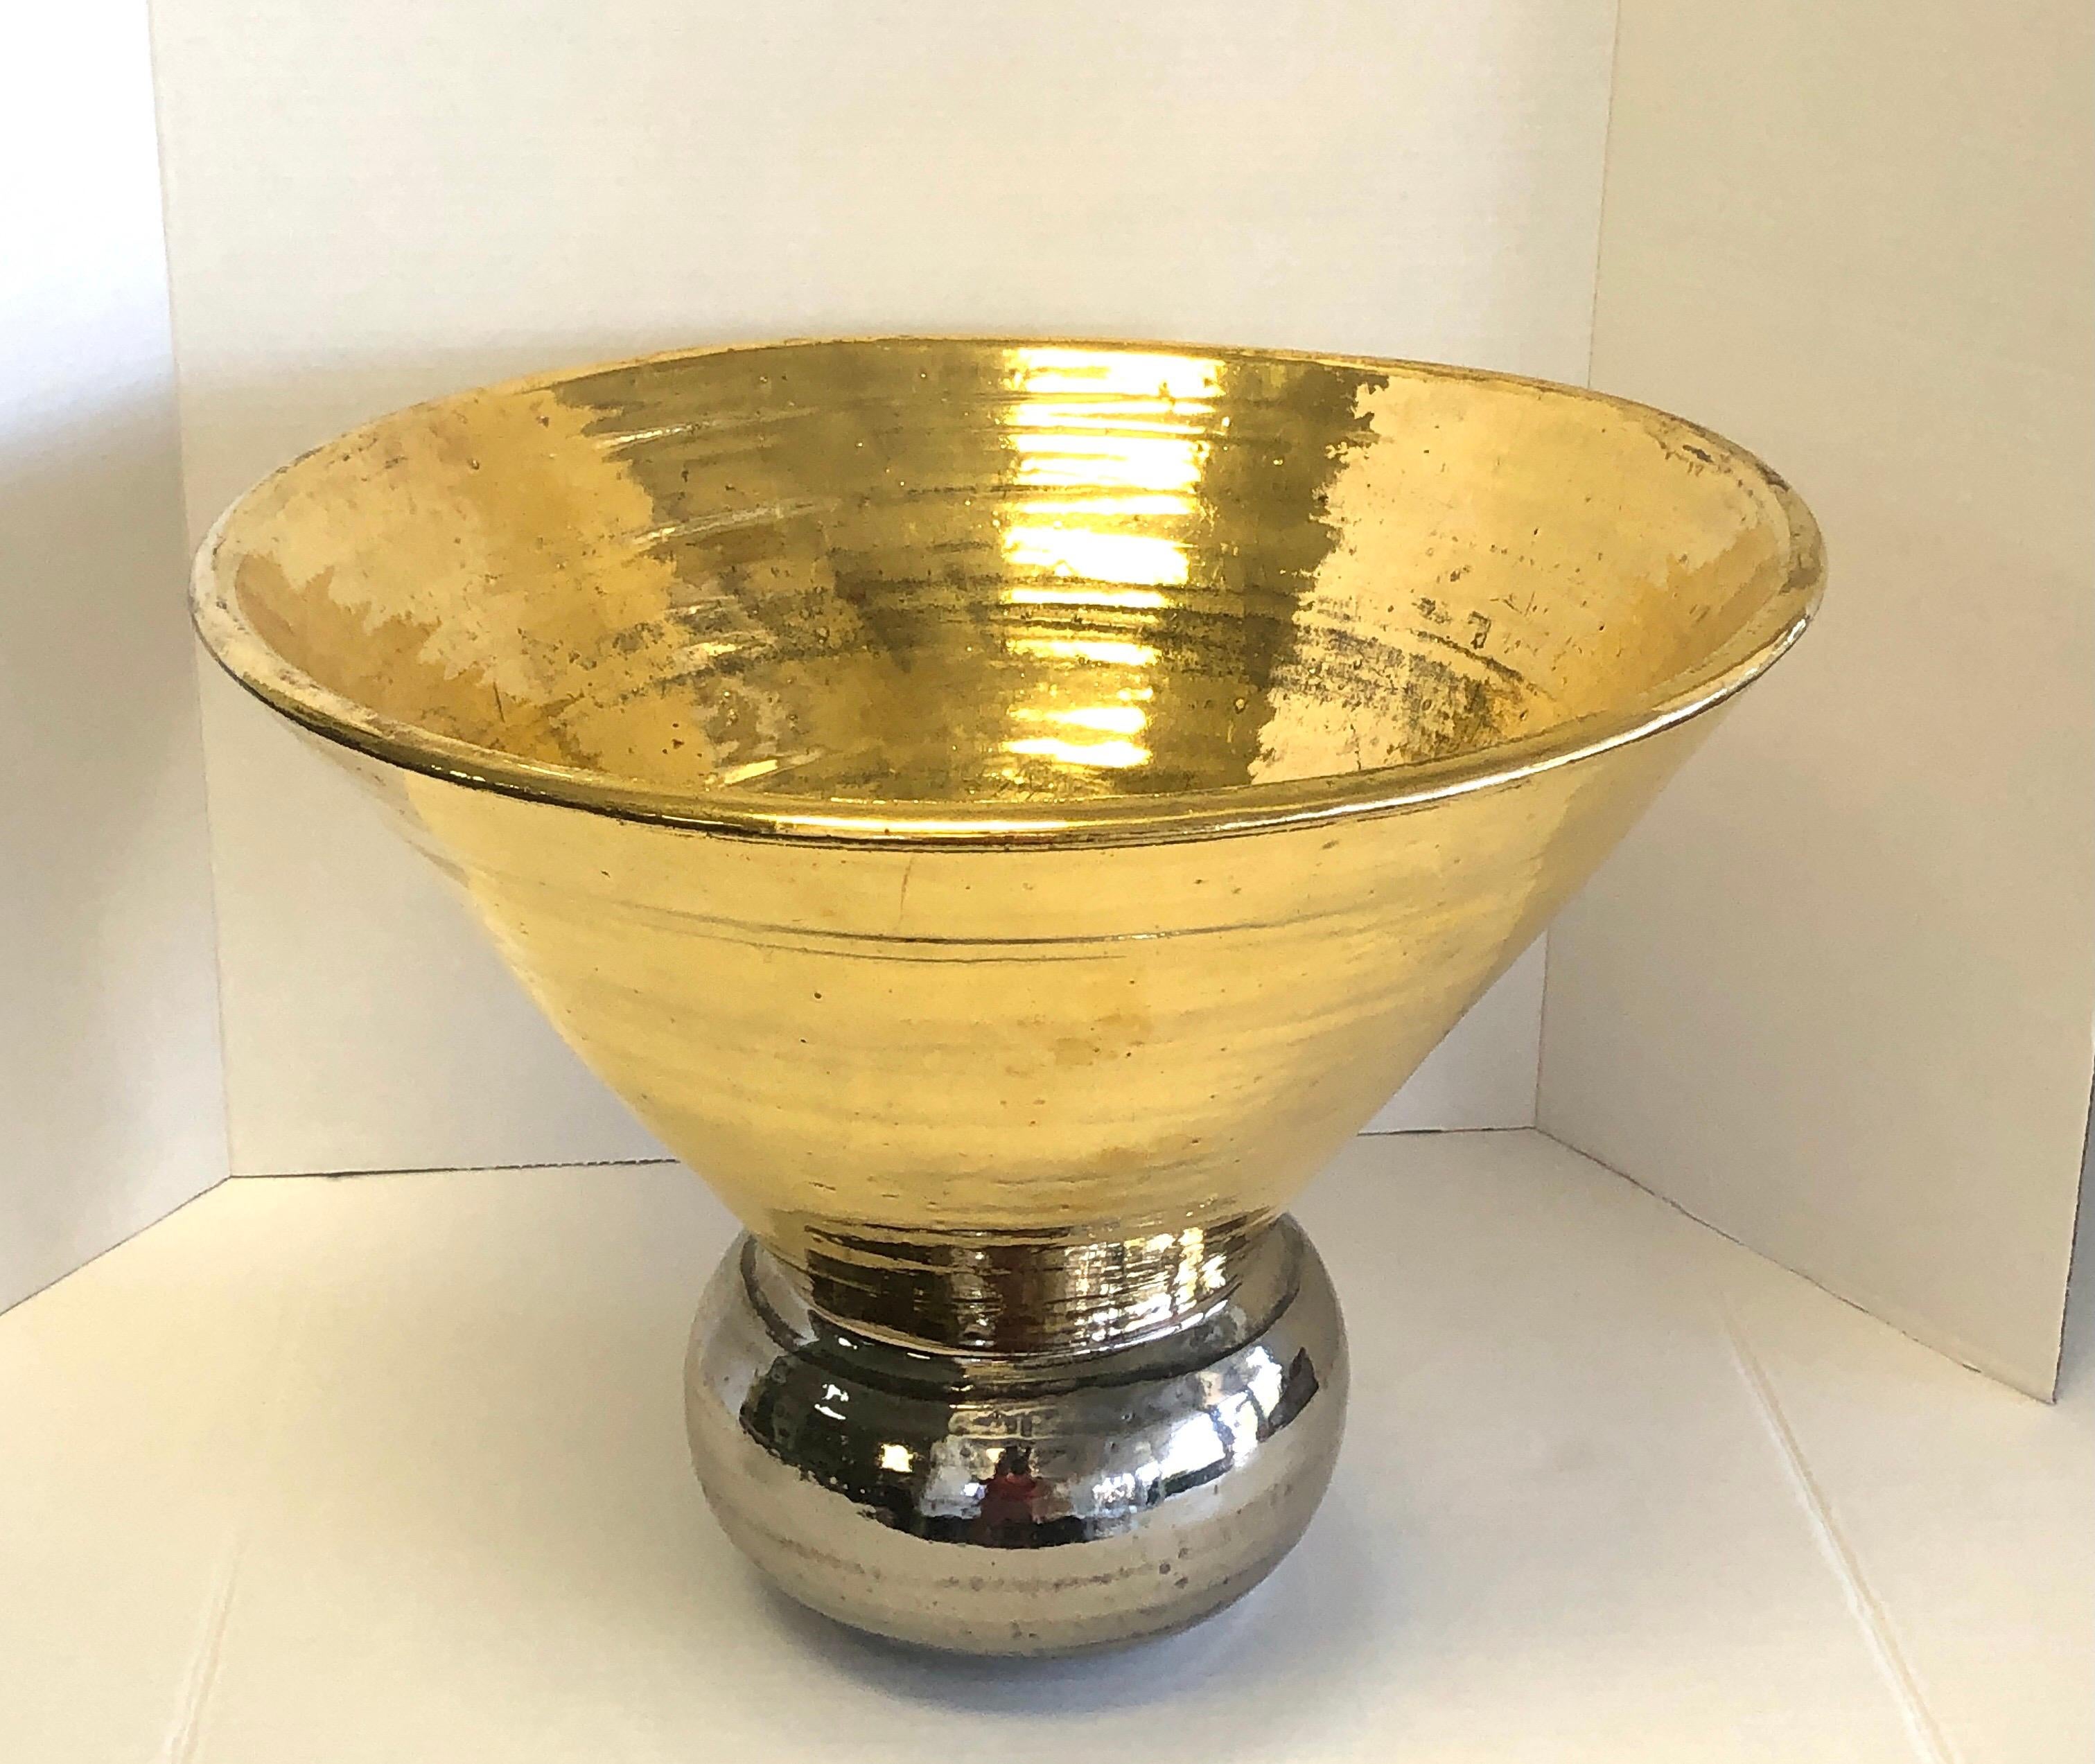 A very large ceramic bowl. Gold and silver glazes. Signed under base.